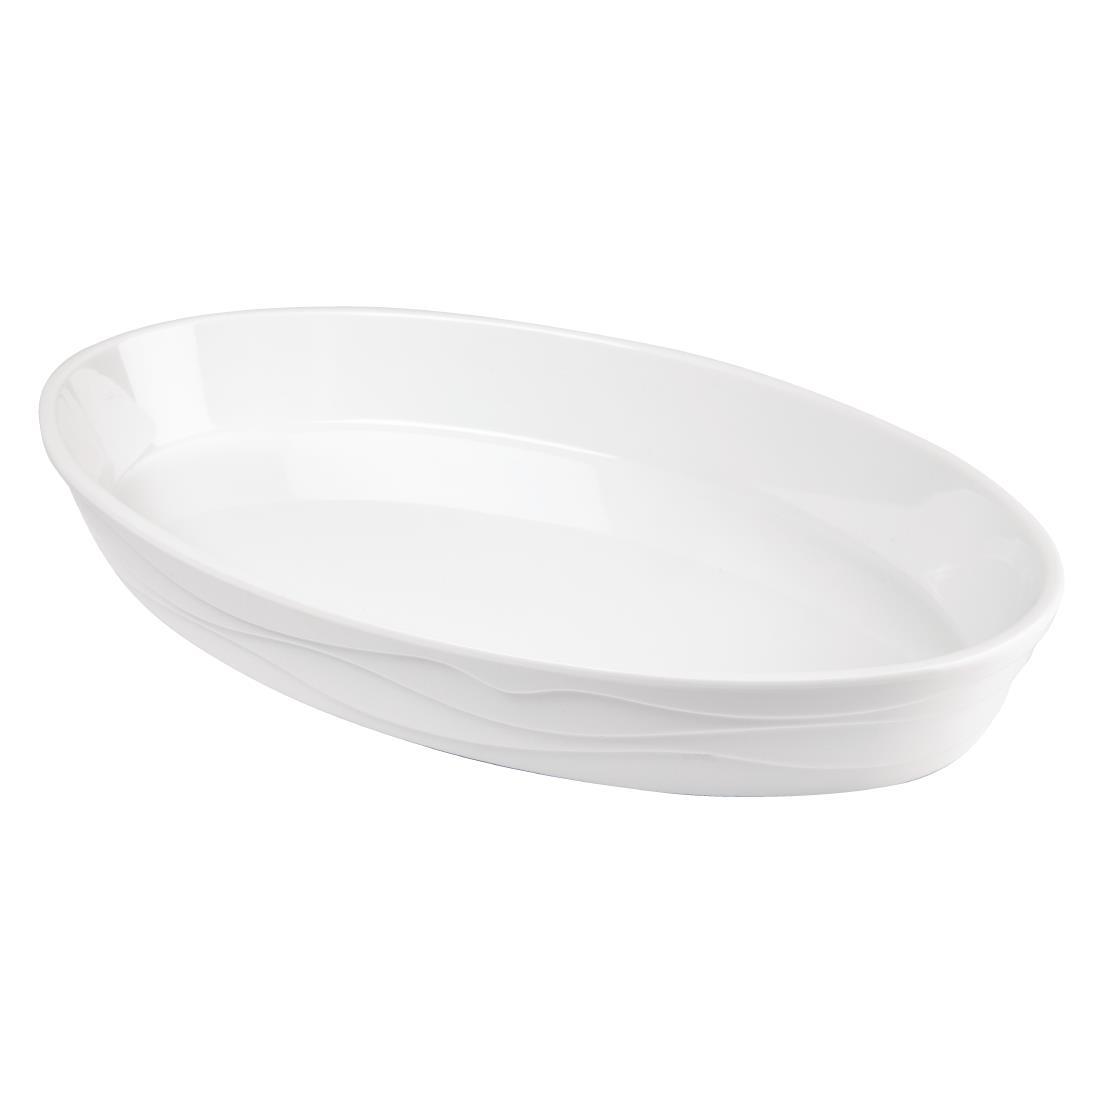 APS Classic Wave Oval Bowl 1.3Ltr - Each - GL633 - 1